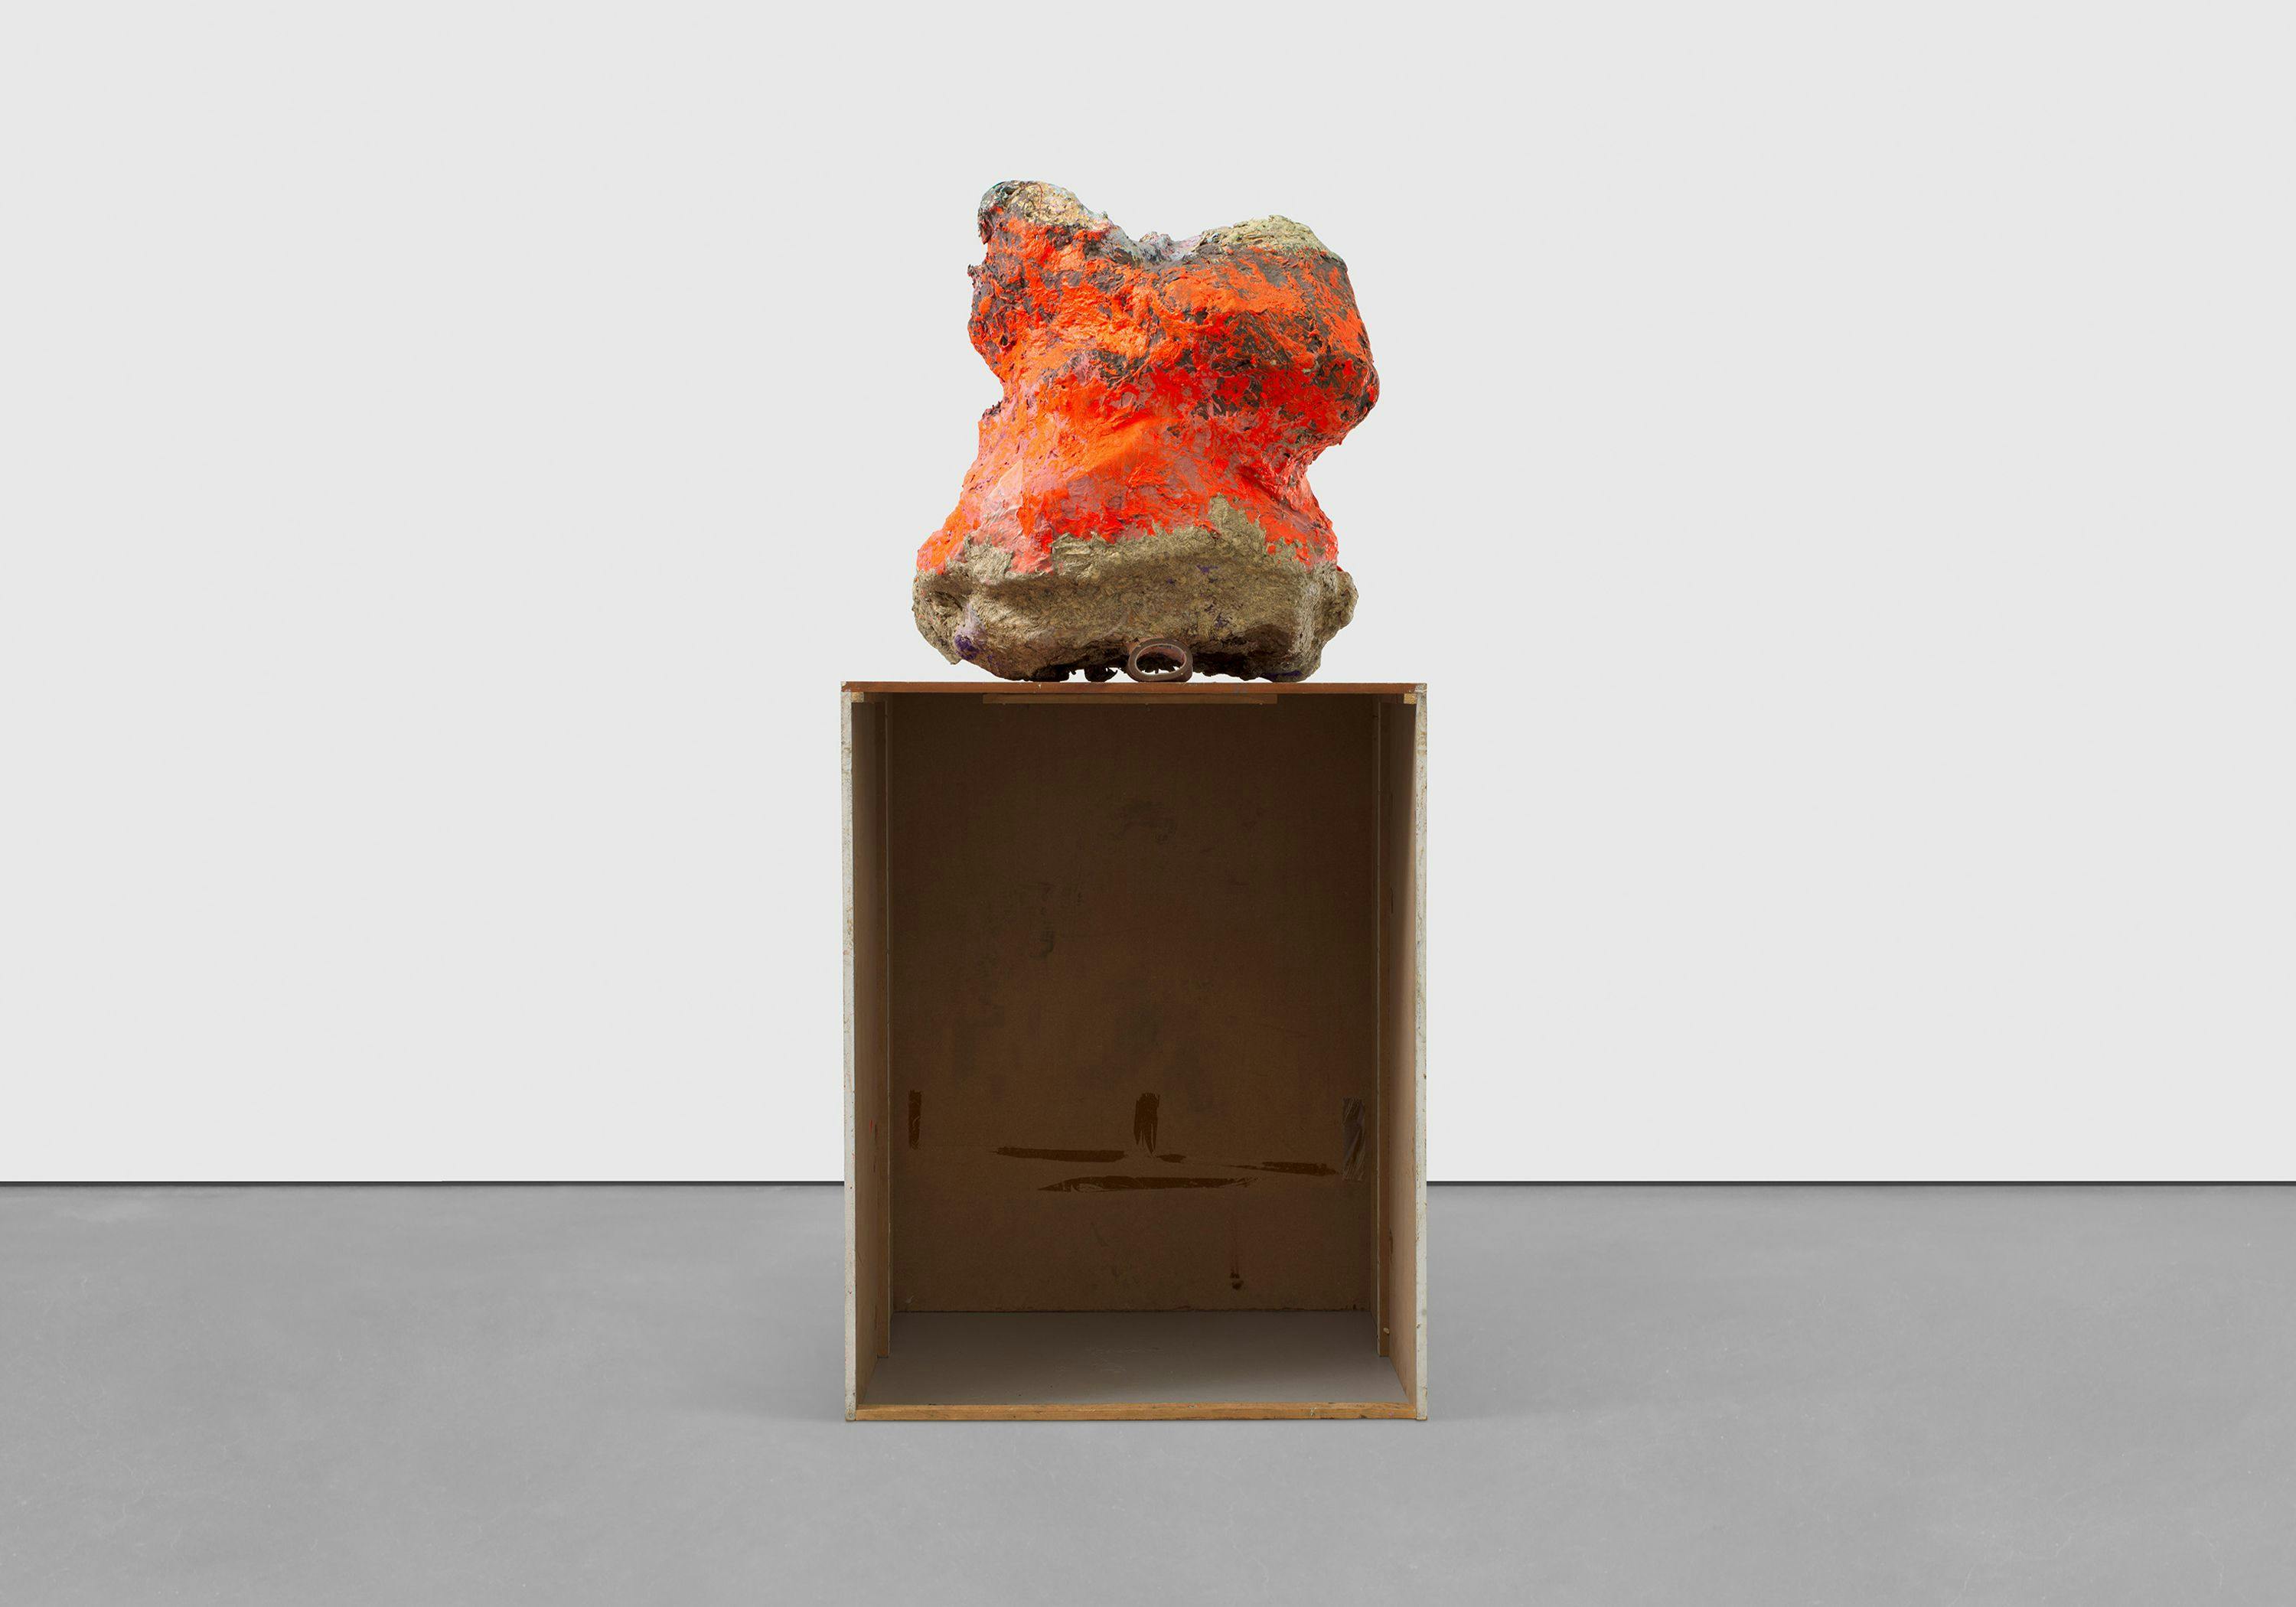 A sculpture by Franz West, titled Pleonasme, translated as Pleonasm, dated 1999.